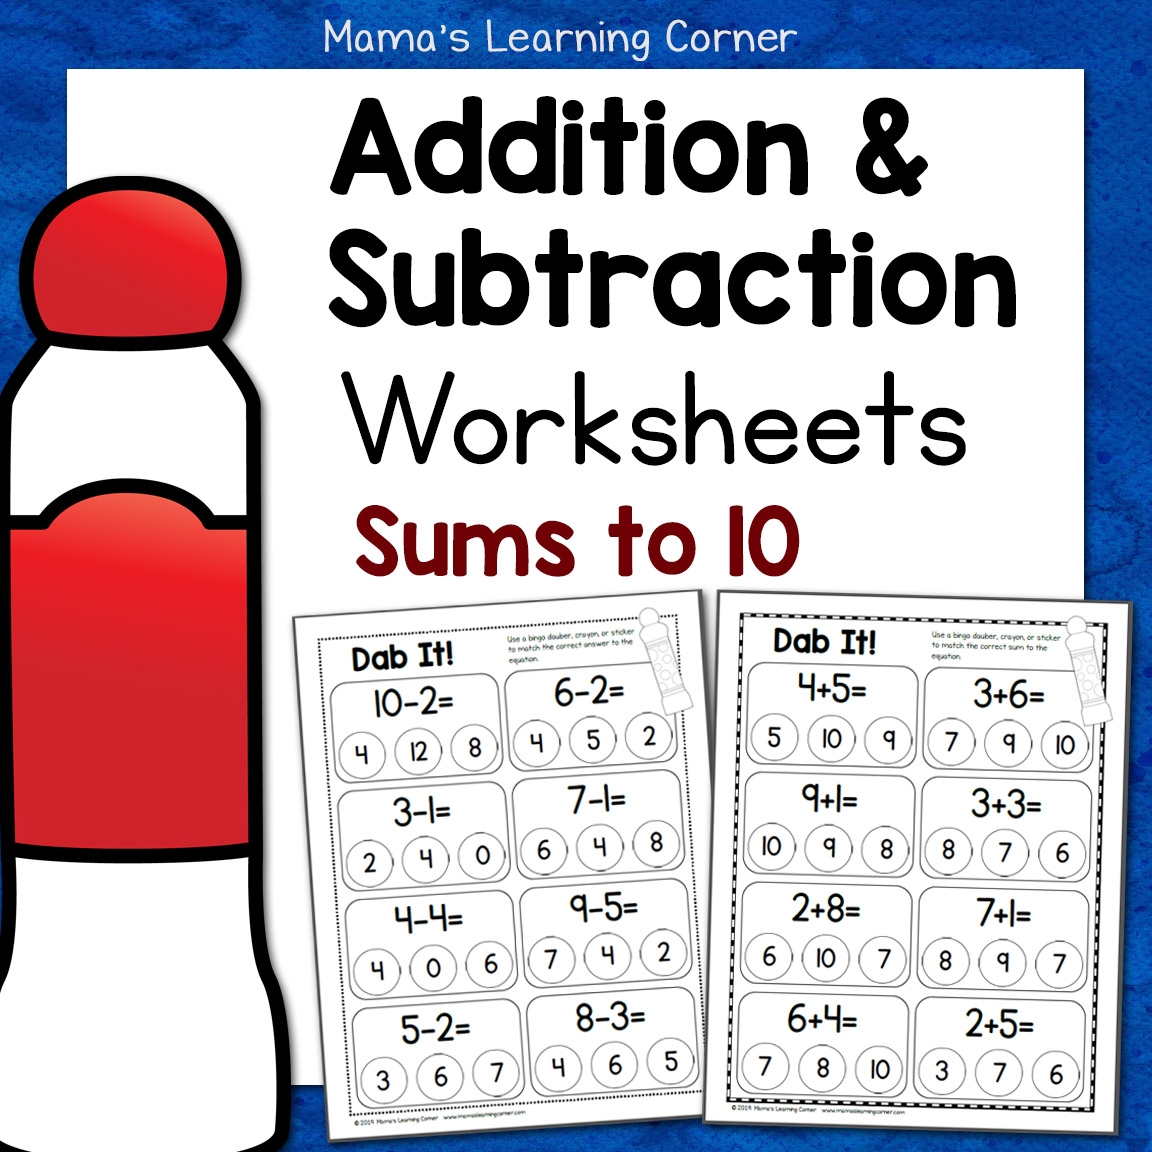 Dab It Addition and Subtraction Worksheets